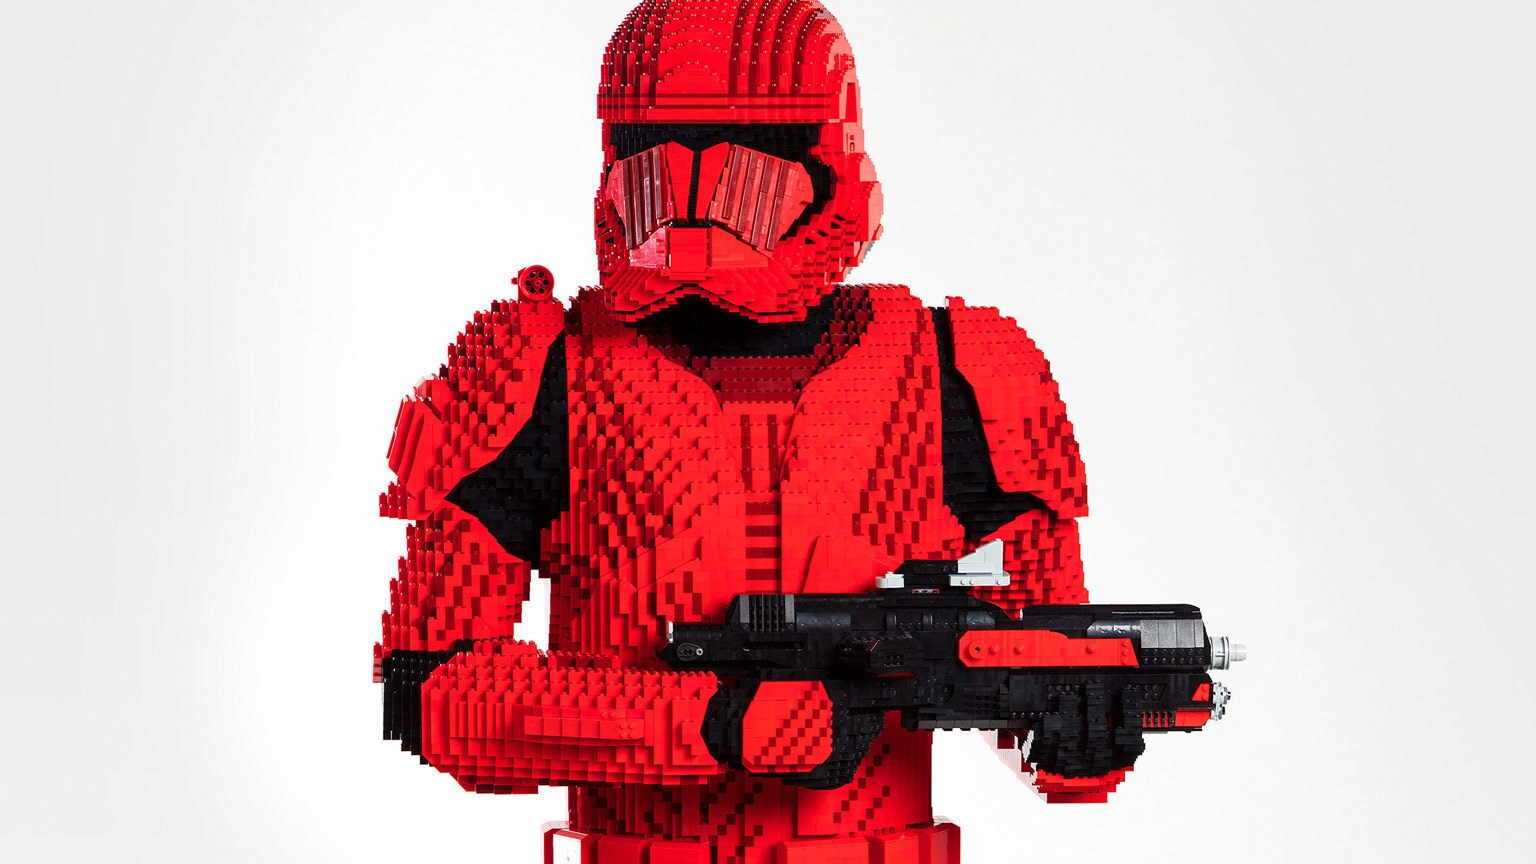 The Sith Trooper Comes to Life - With Over 34,000 LEGO Bricks